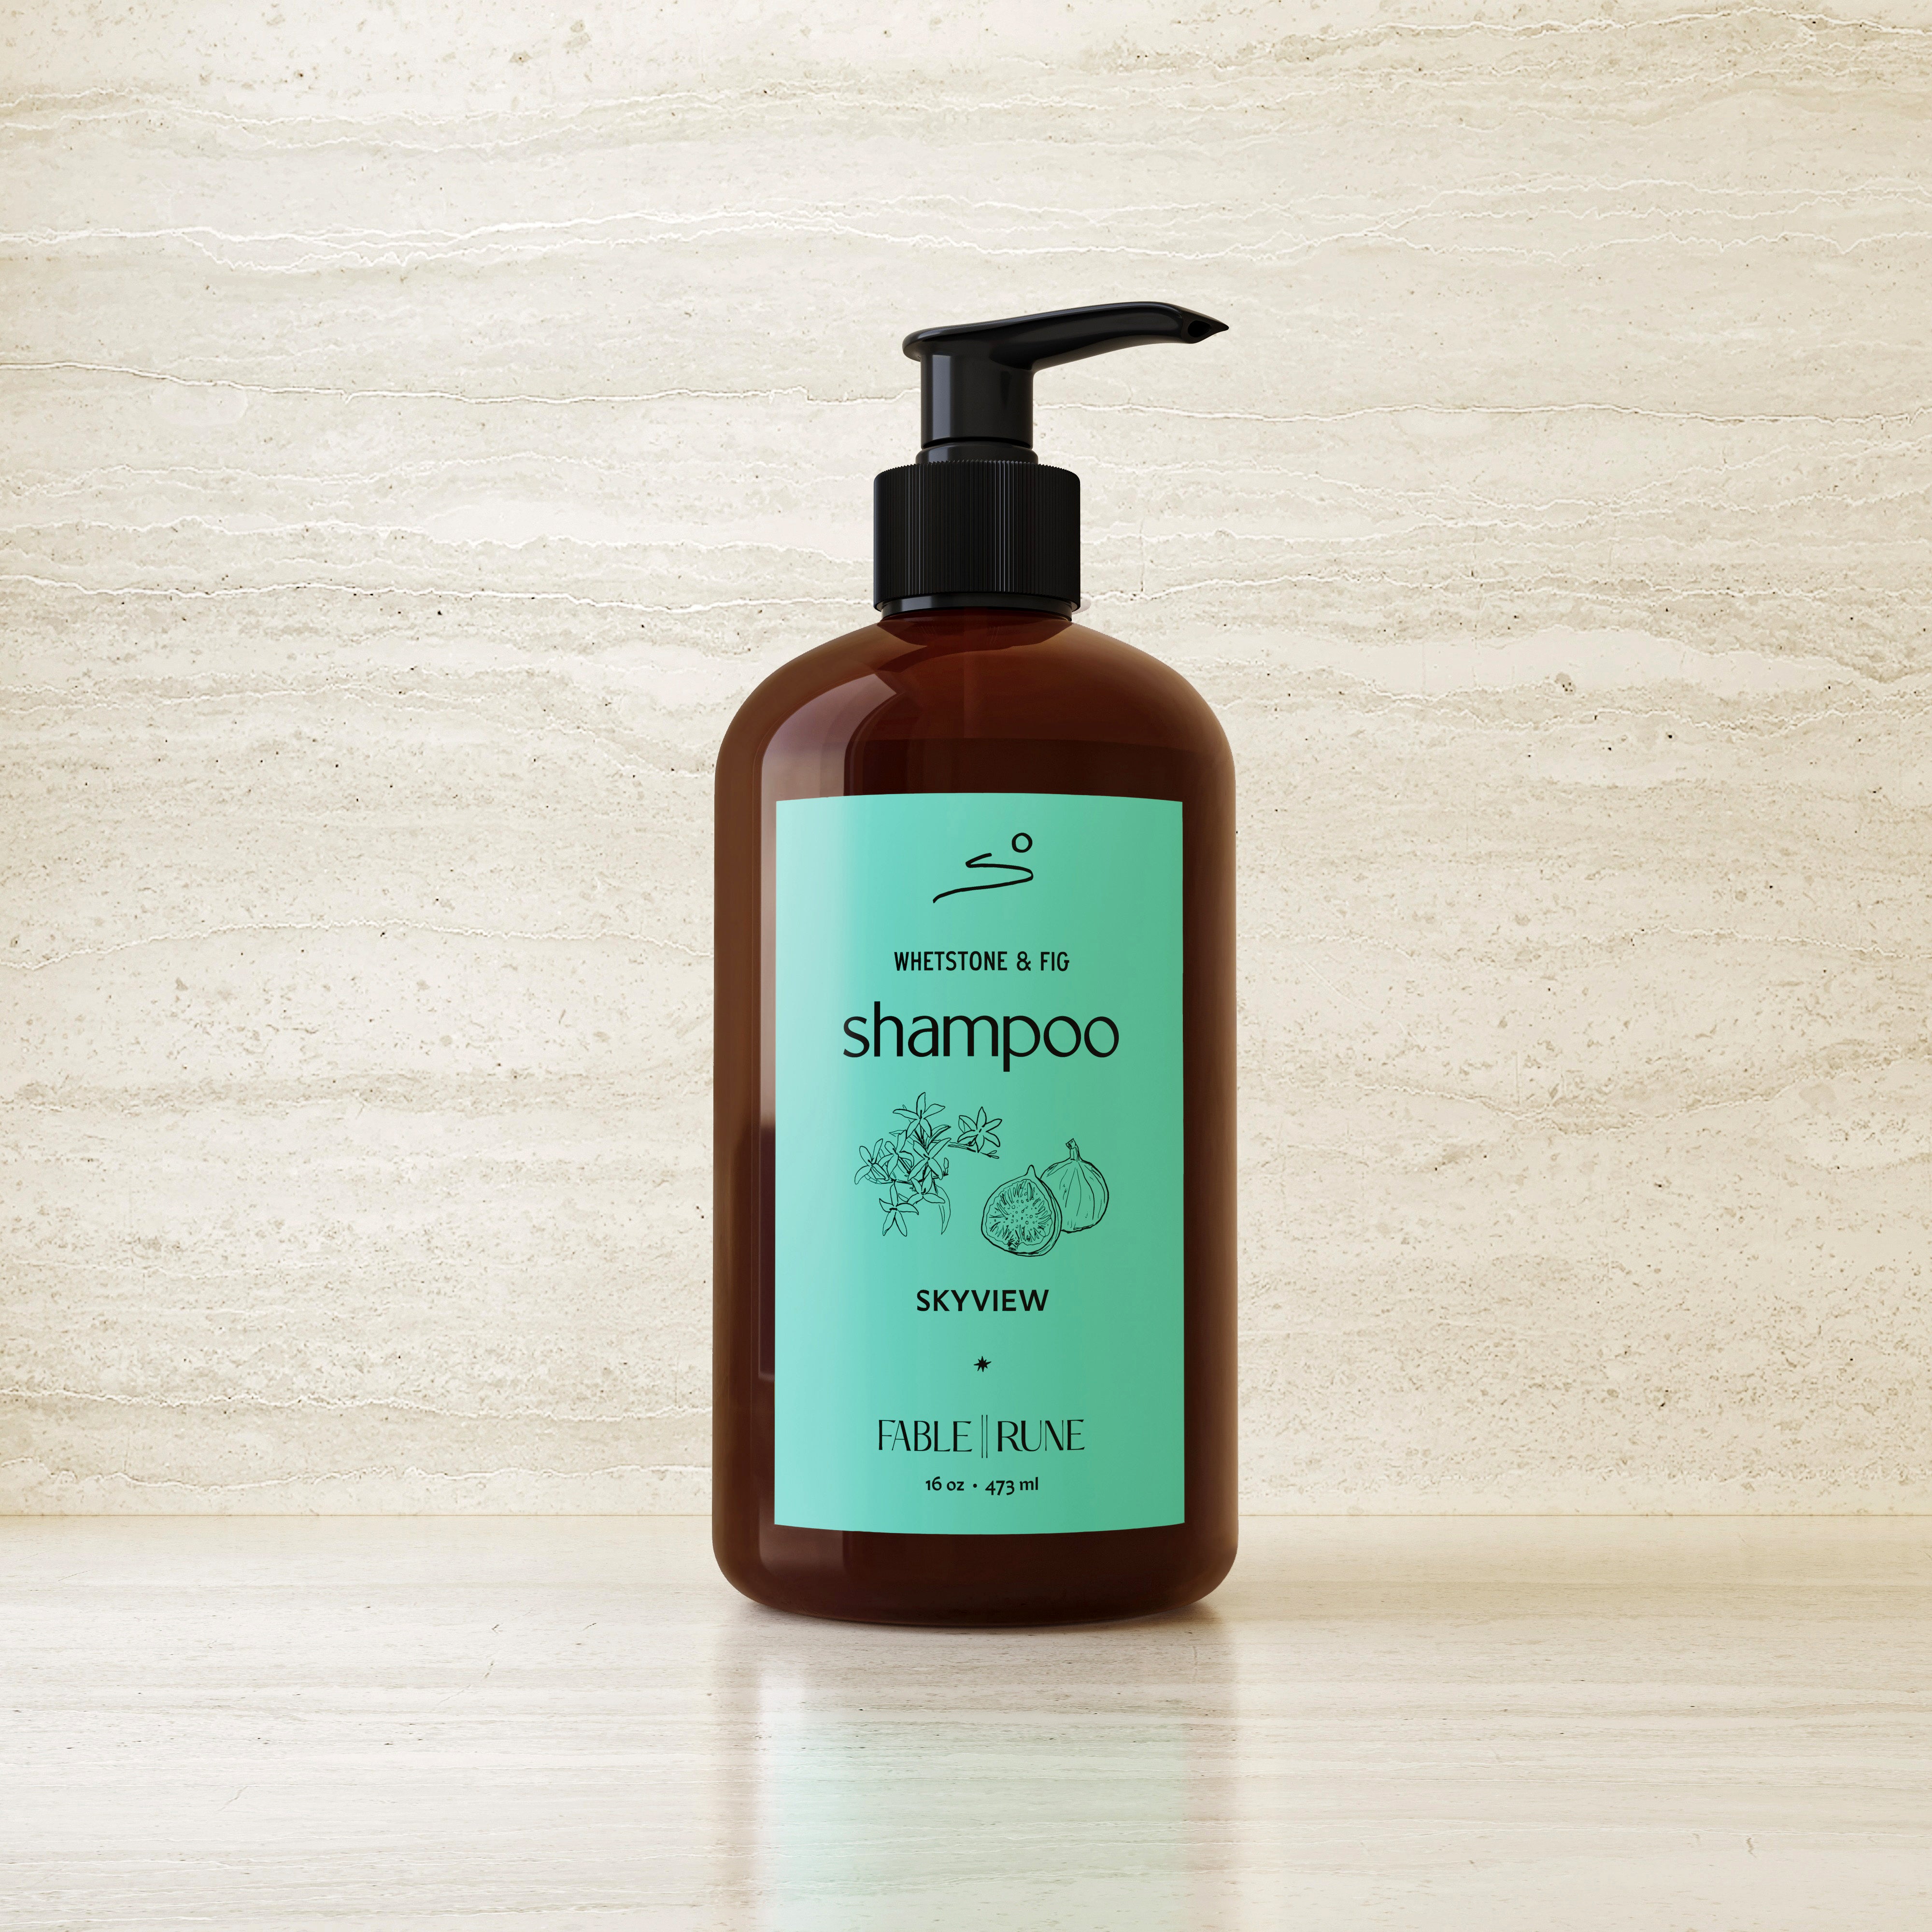 Whetstone & Fig Shampoo Fable Rune Exclusive Skyview Los Alamos by Nomada Deco